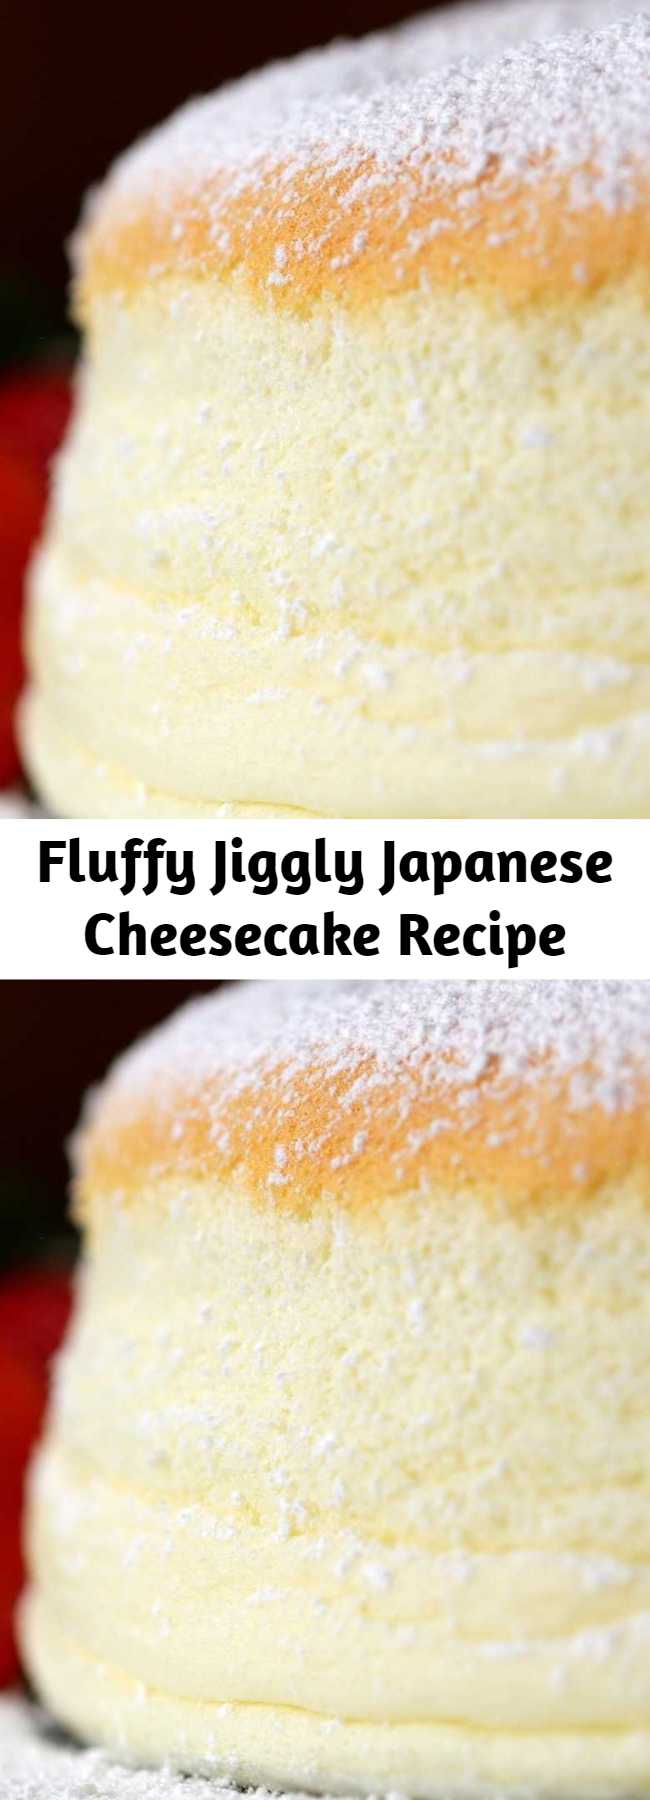 Fluffy Jiggly Japanese Cheesecake Recipe - Learn to master this Japanese classic dish in your own home! Get ready to whip a lot of egg whites to create this exciting jiggly texture as well as layer in flavors like cream cheese.